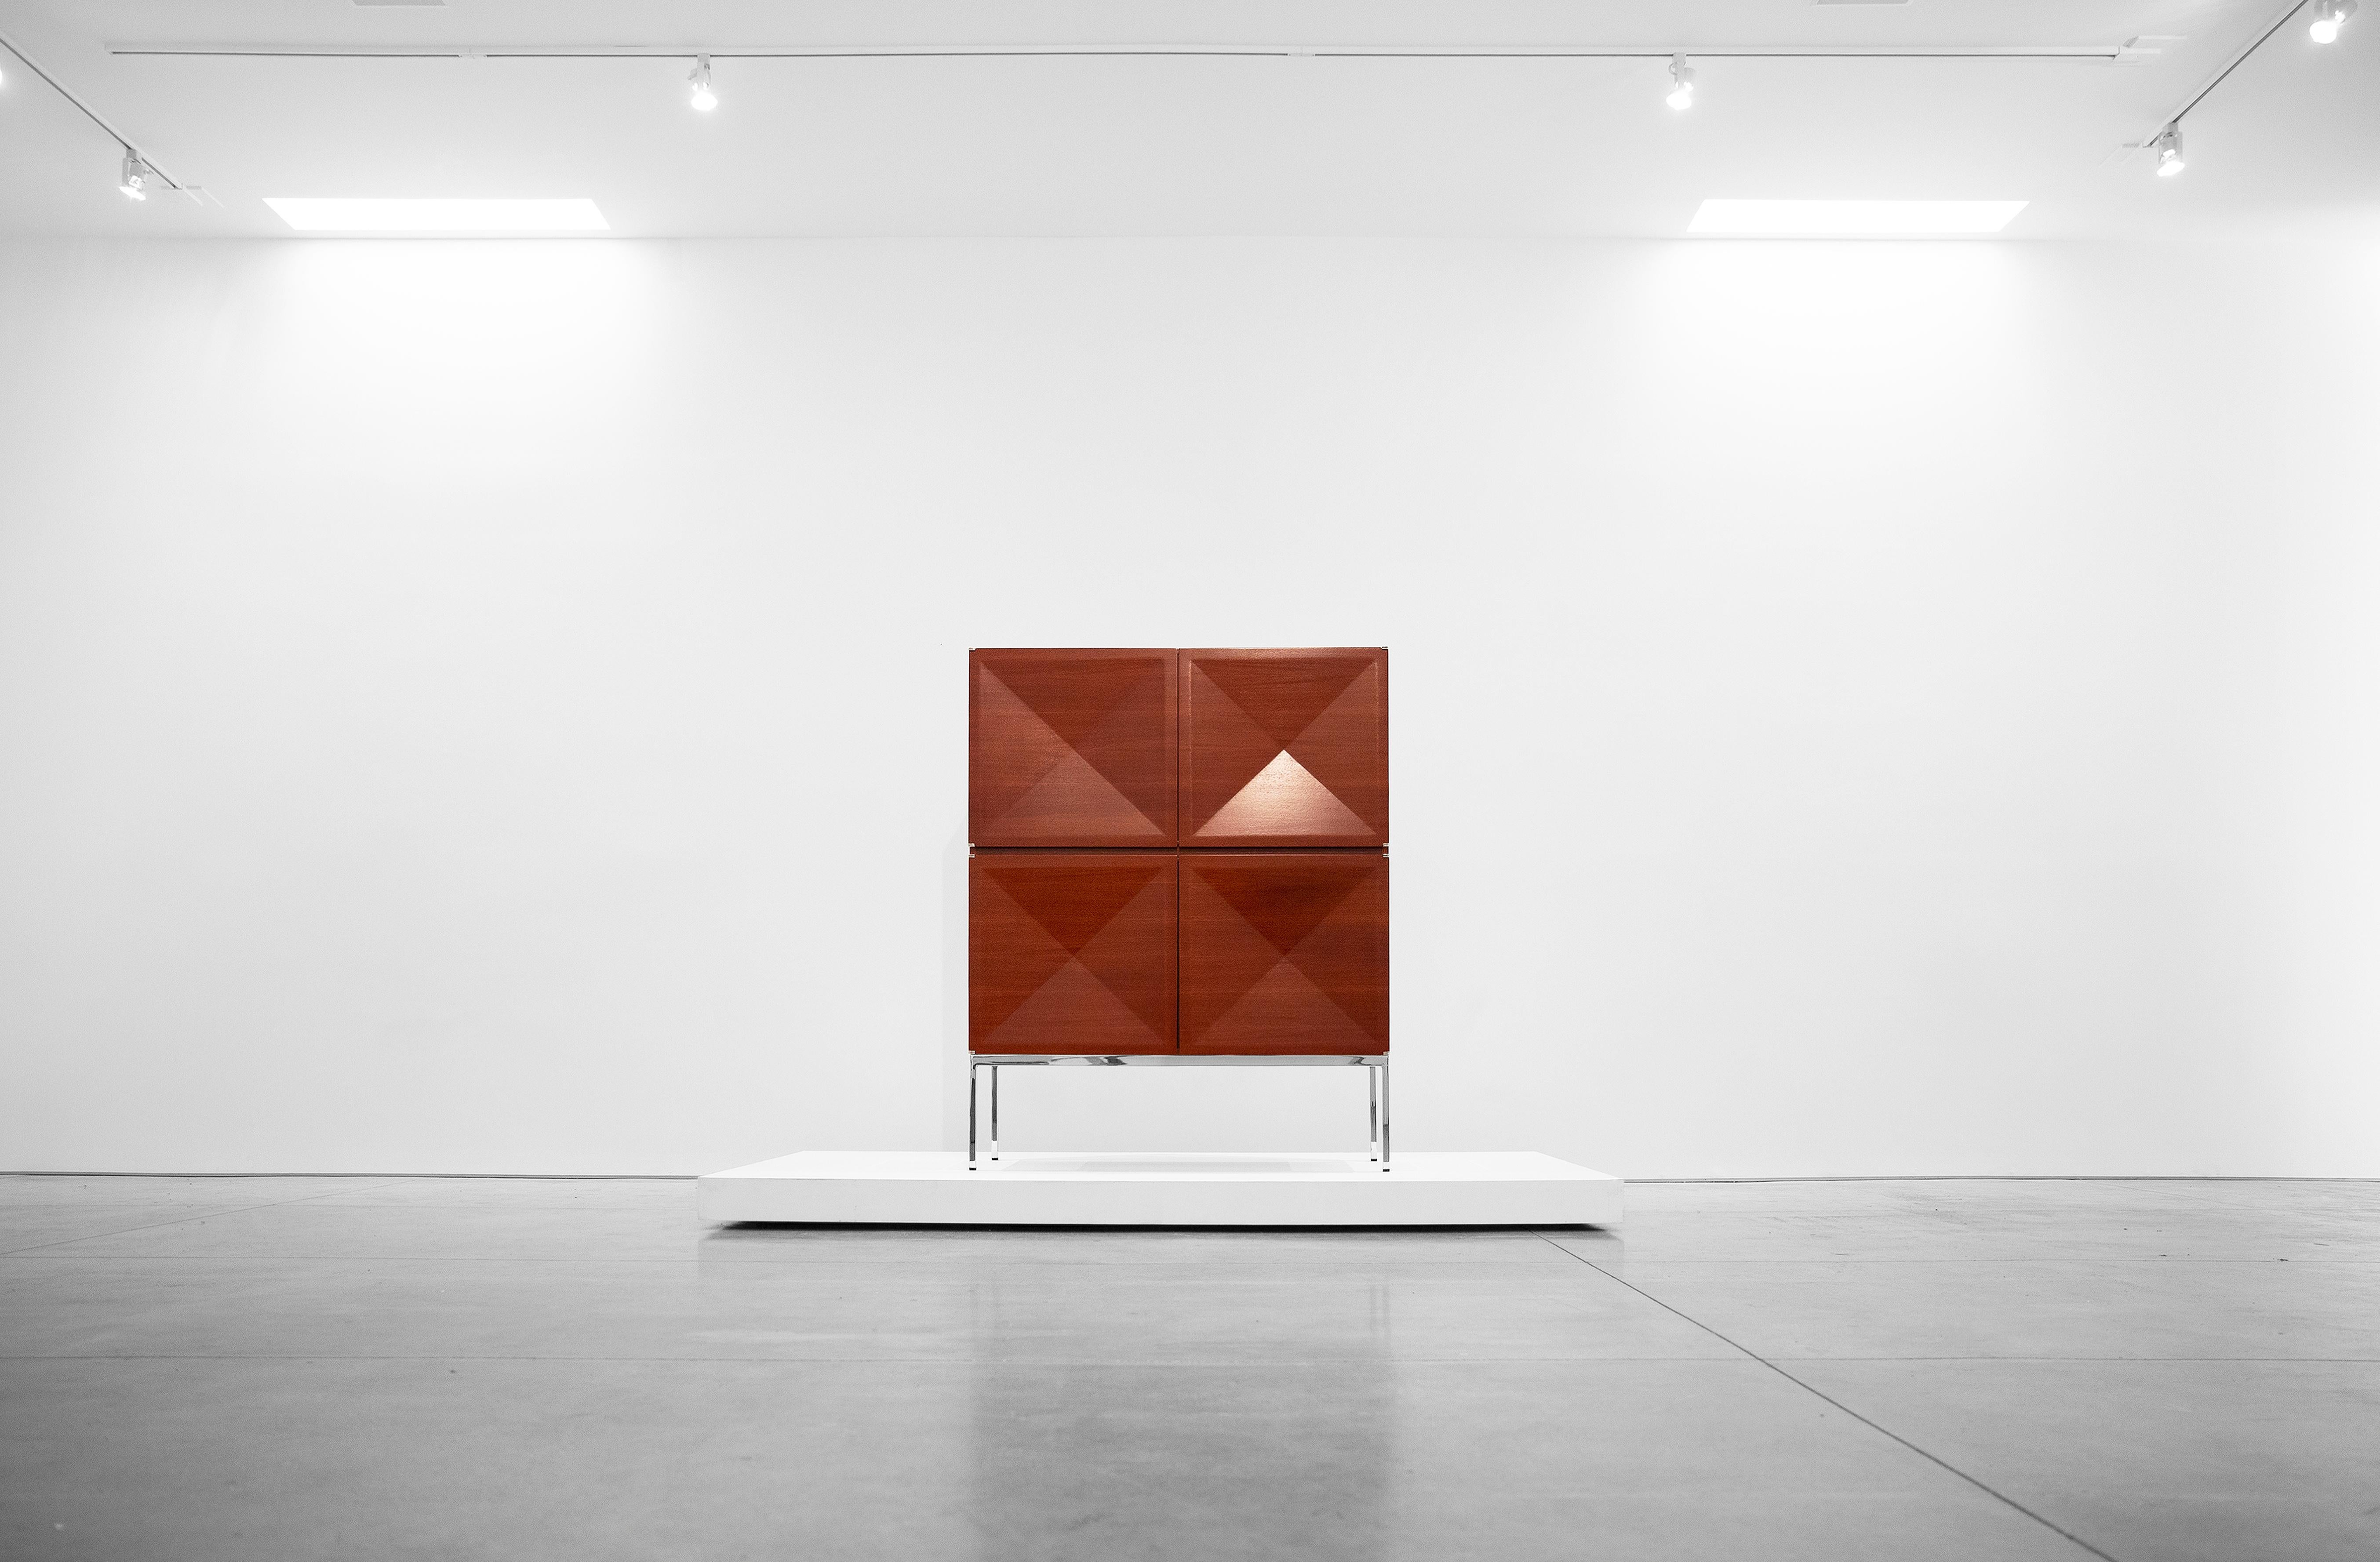 Antoine Philippon & Jacqueline Lecoq, Cabinet, 1307 series, edition Erwin Behr, circa 1962, mahogany, chrome-plated steel, Measures: 62 H x 47.25 W x 21 D inches.

This cabinet was designed in 1962 by Antoine Philippon and Jacqueline Lecoq on the